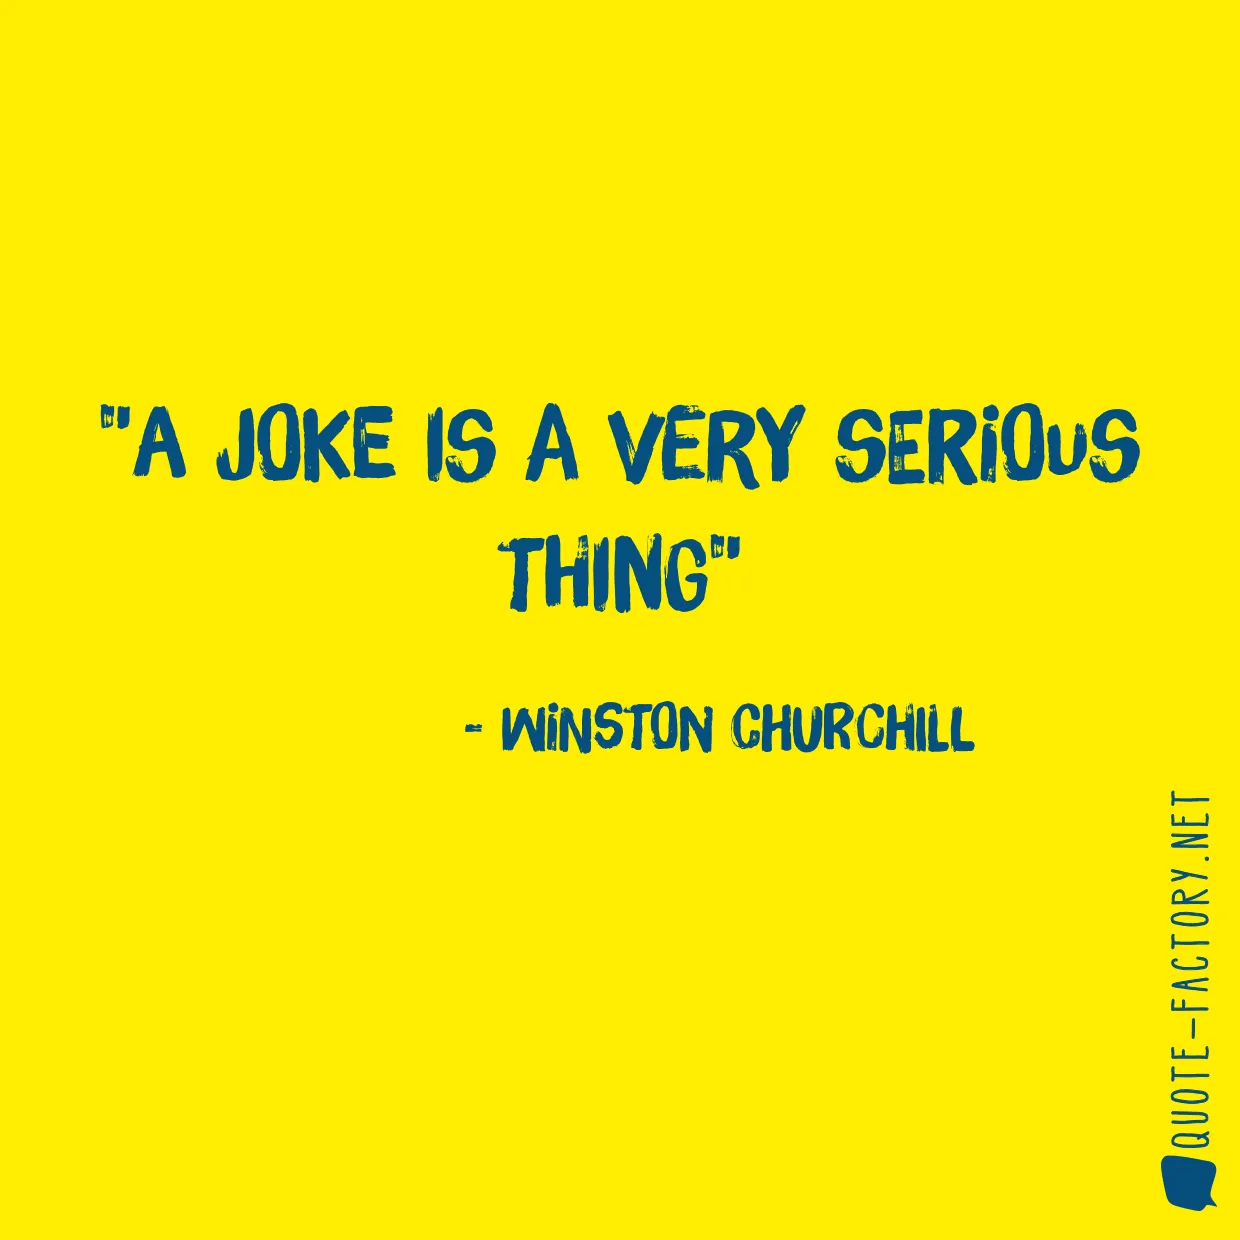 A joke is a very serious thing